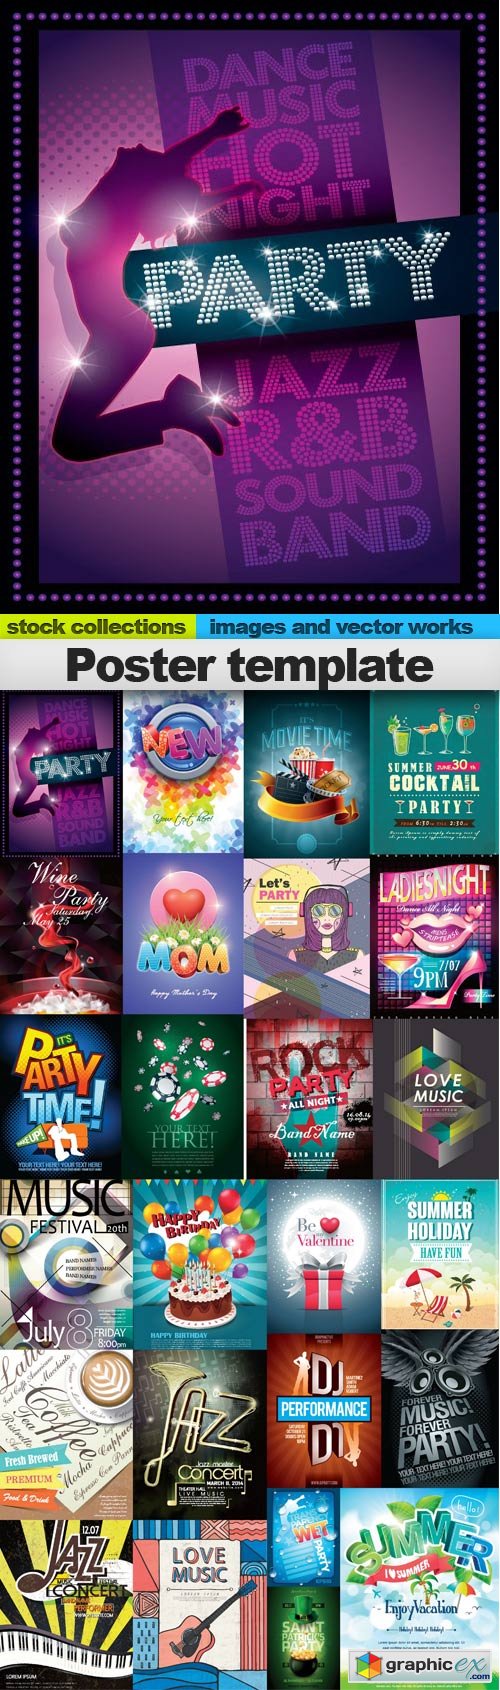 Poster template vector 25xEPS